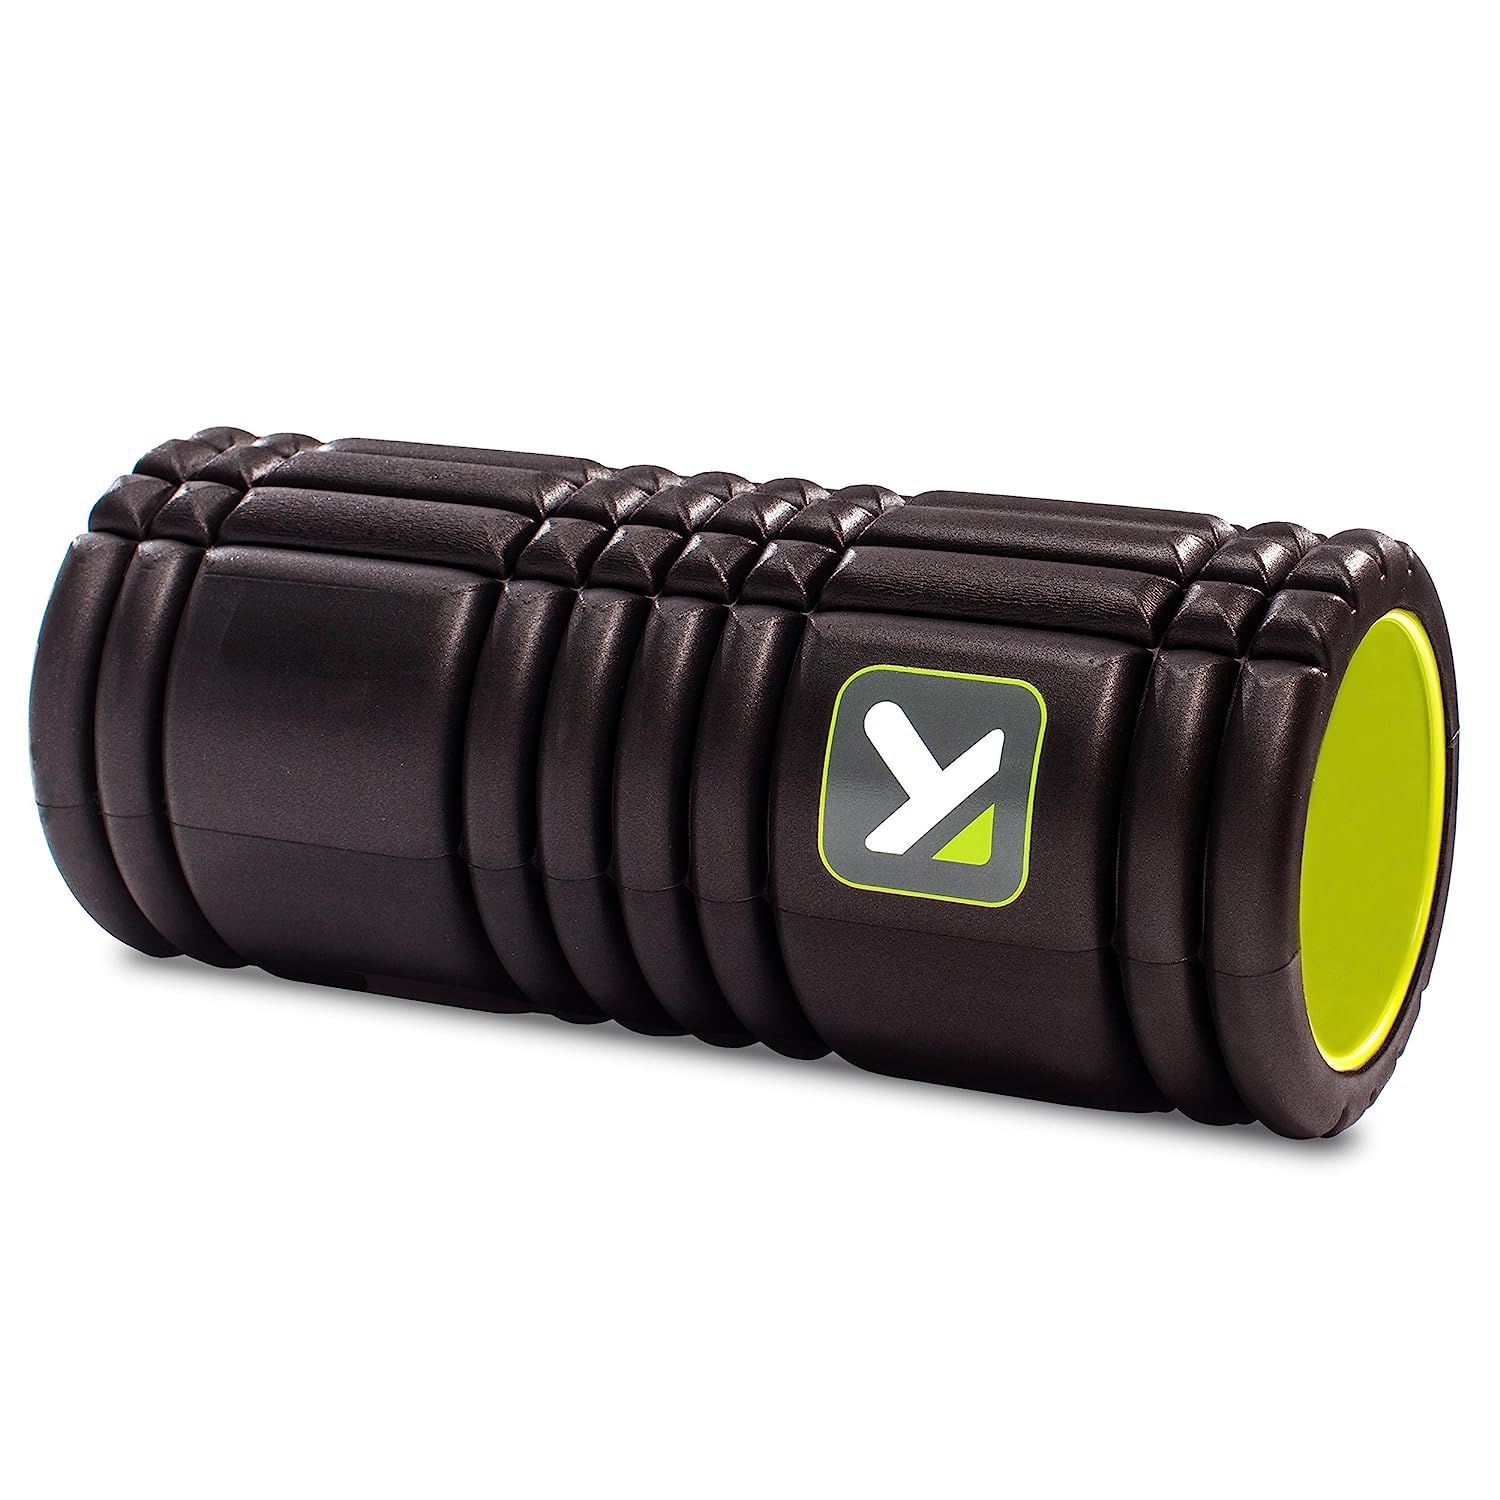 TriggerPoint GRID Foam Roller with Free Online Instructional Videos, Original (13-Inch) | Amazon (US)